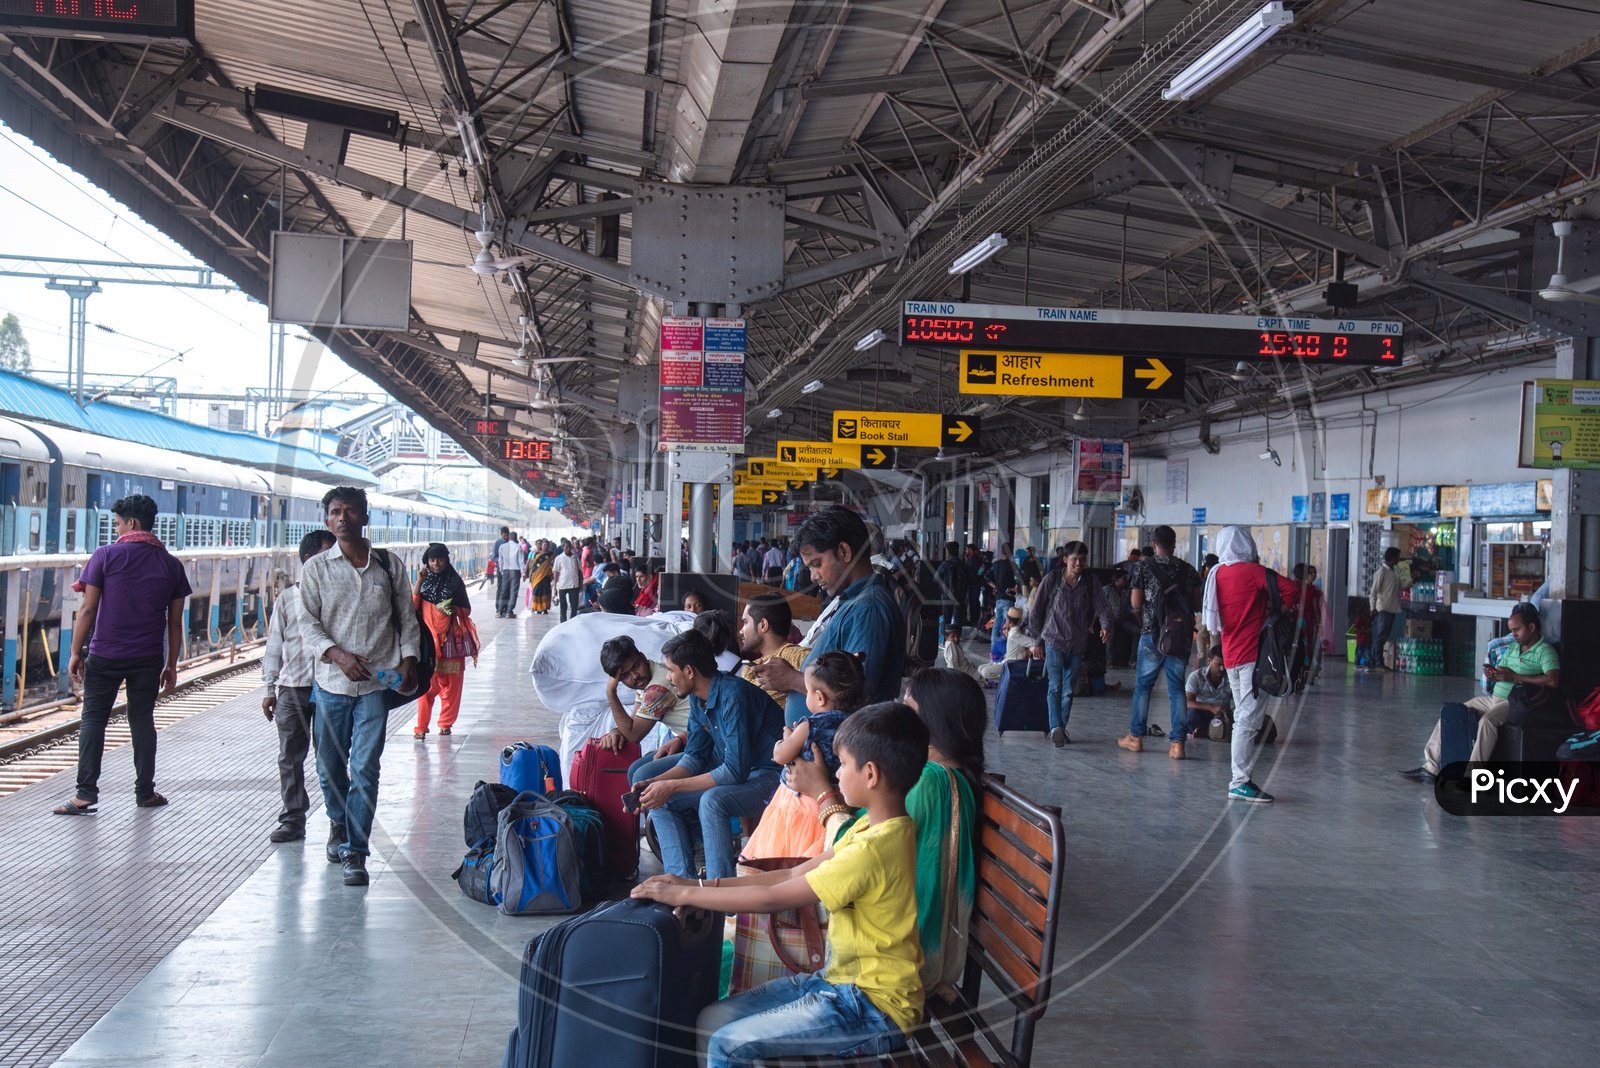 Passengers Waiting By Sitting on Benches With Travel Bags  In a Railway Station Platform